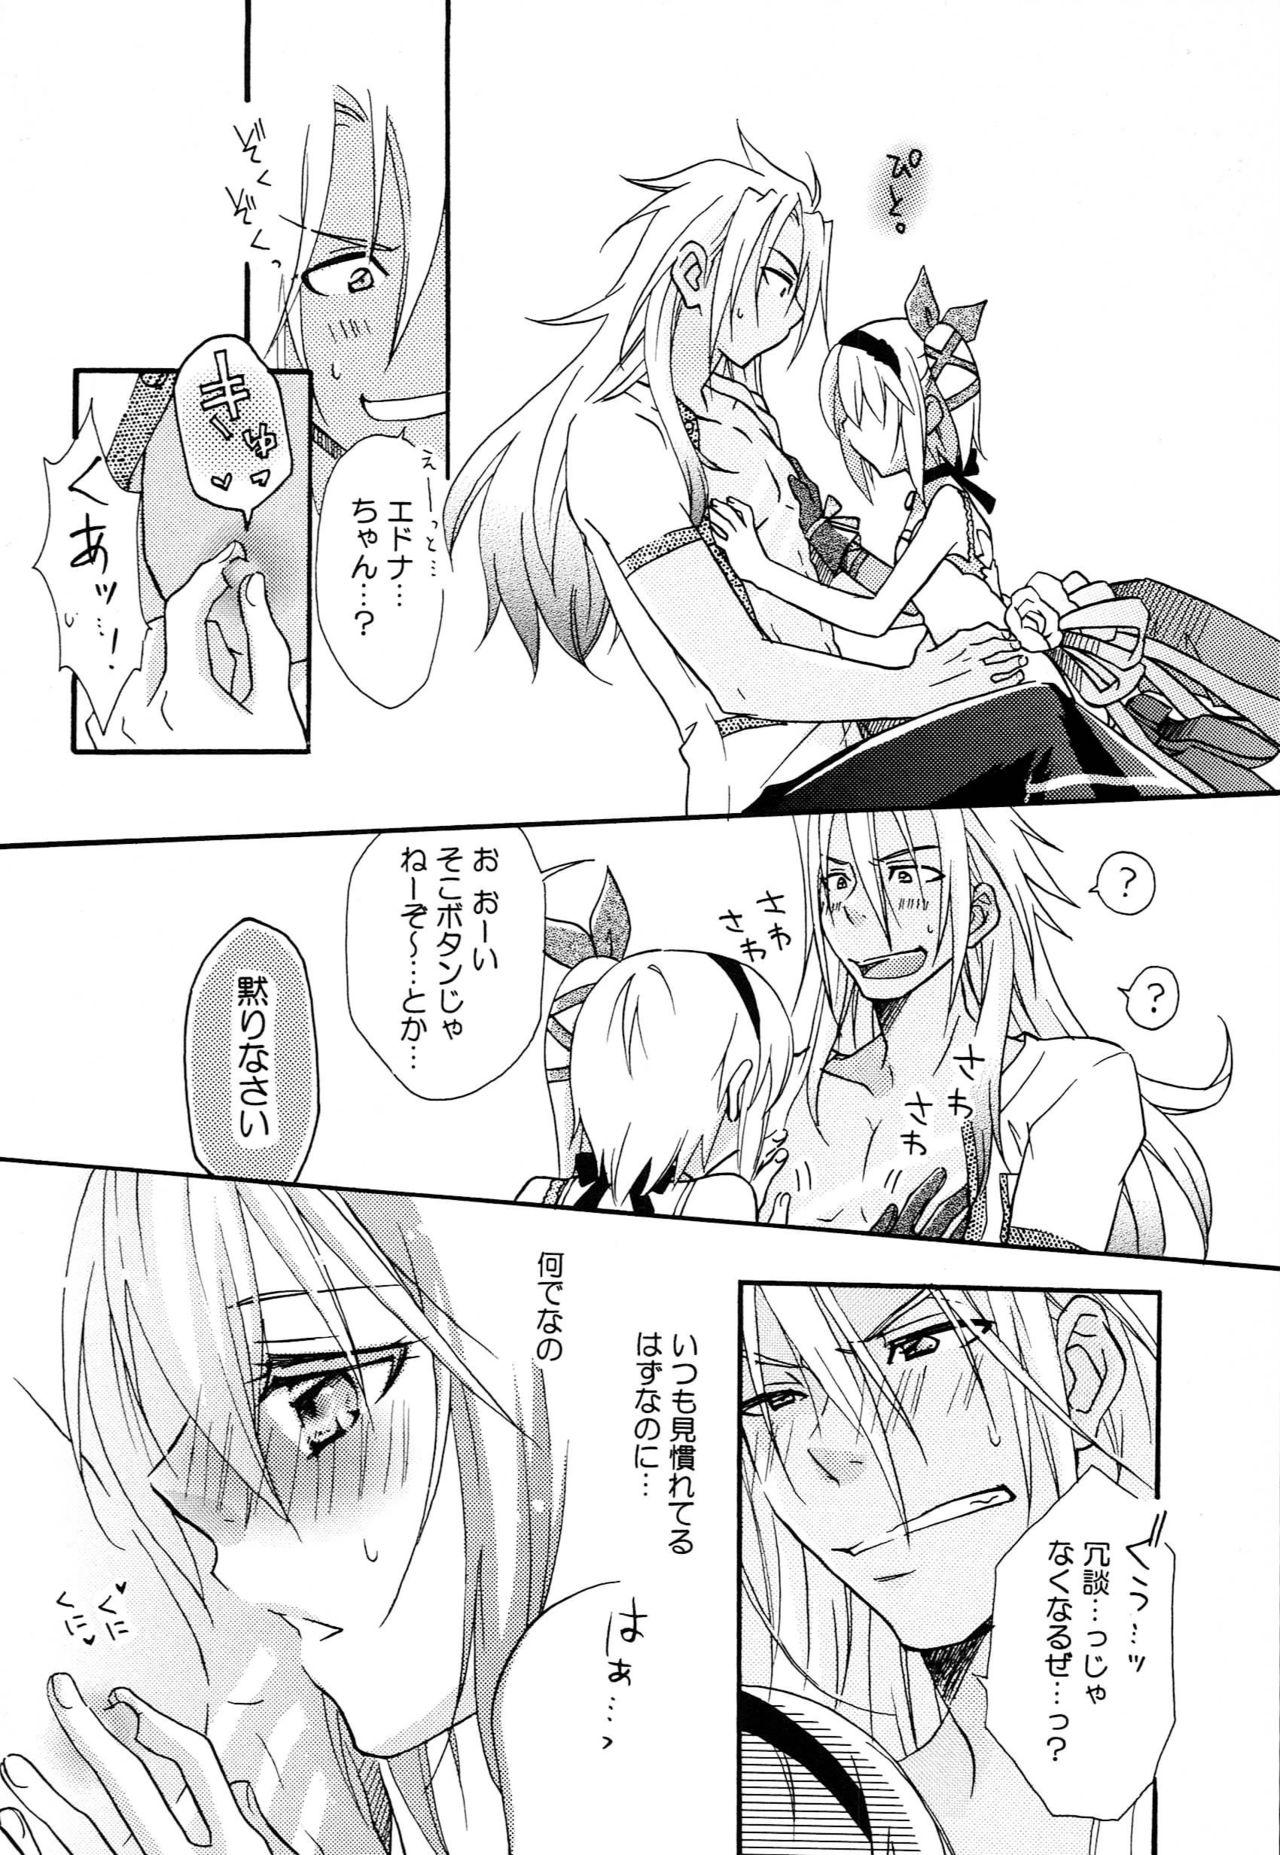 Lolicon Like a Sweet Bullet - Tales of zestiria Punishment - Page 11